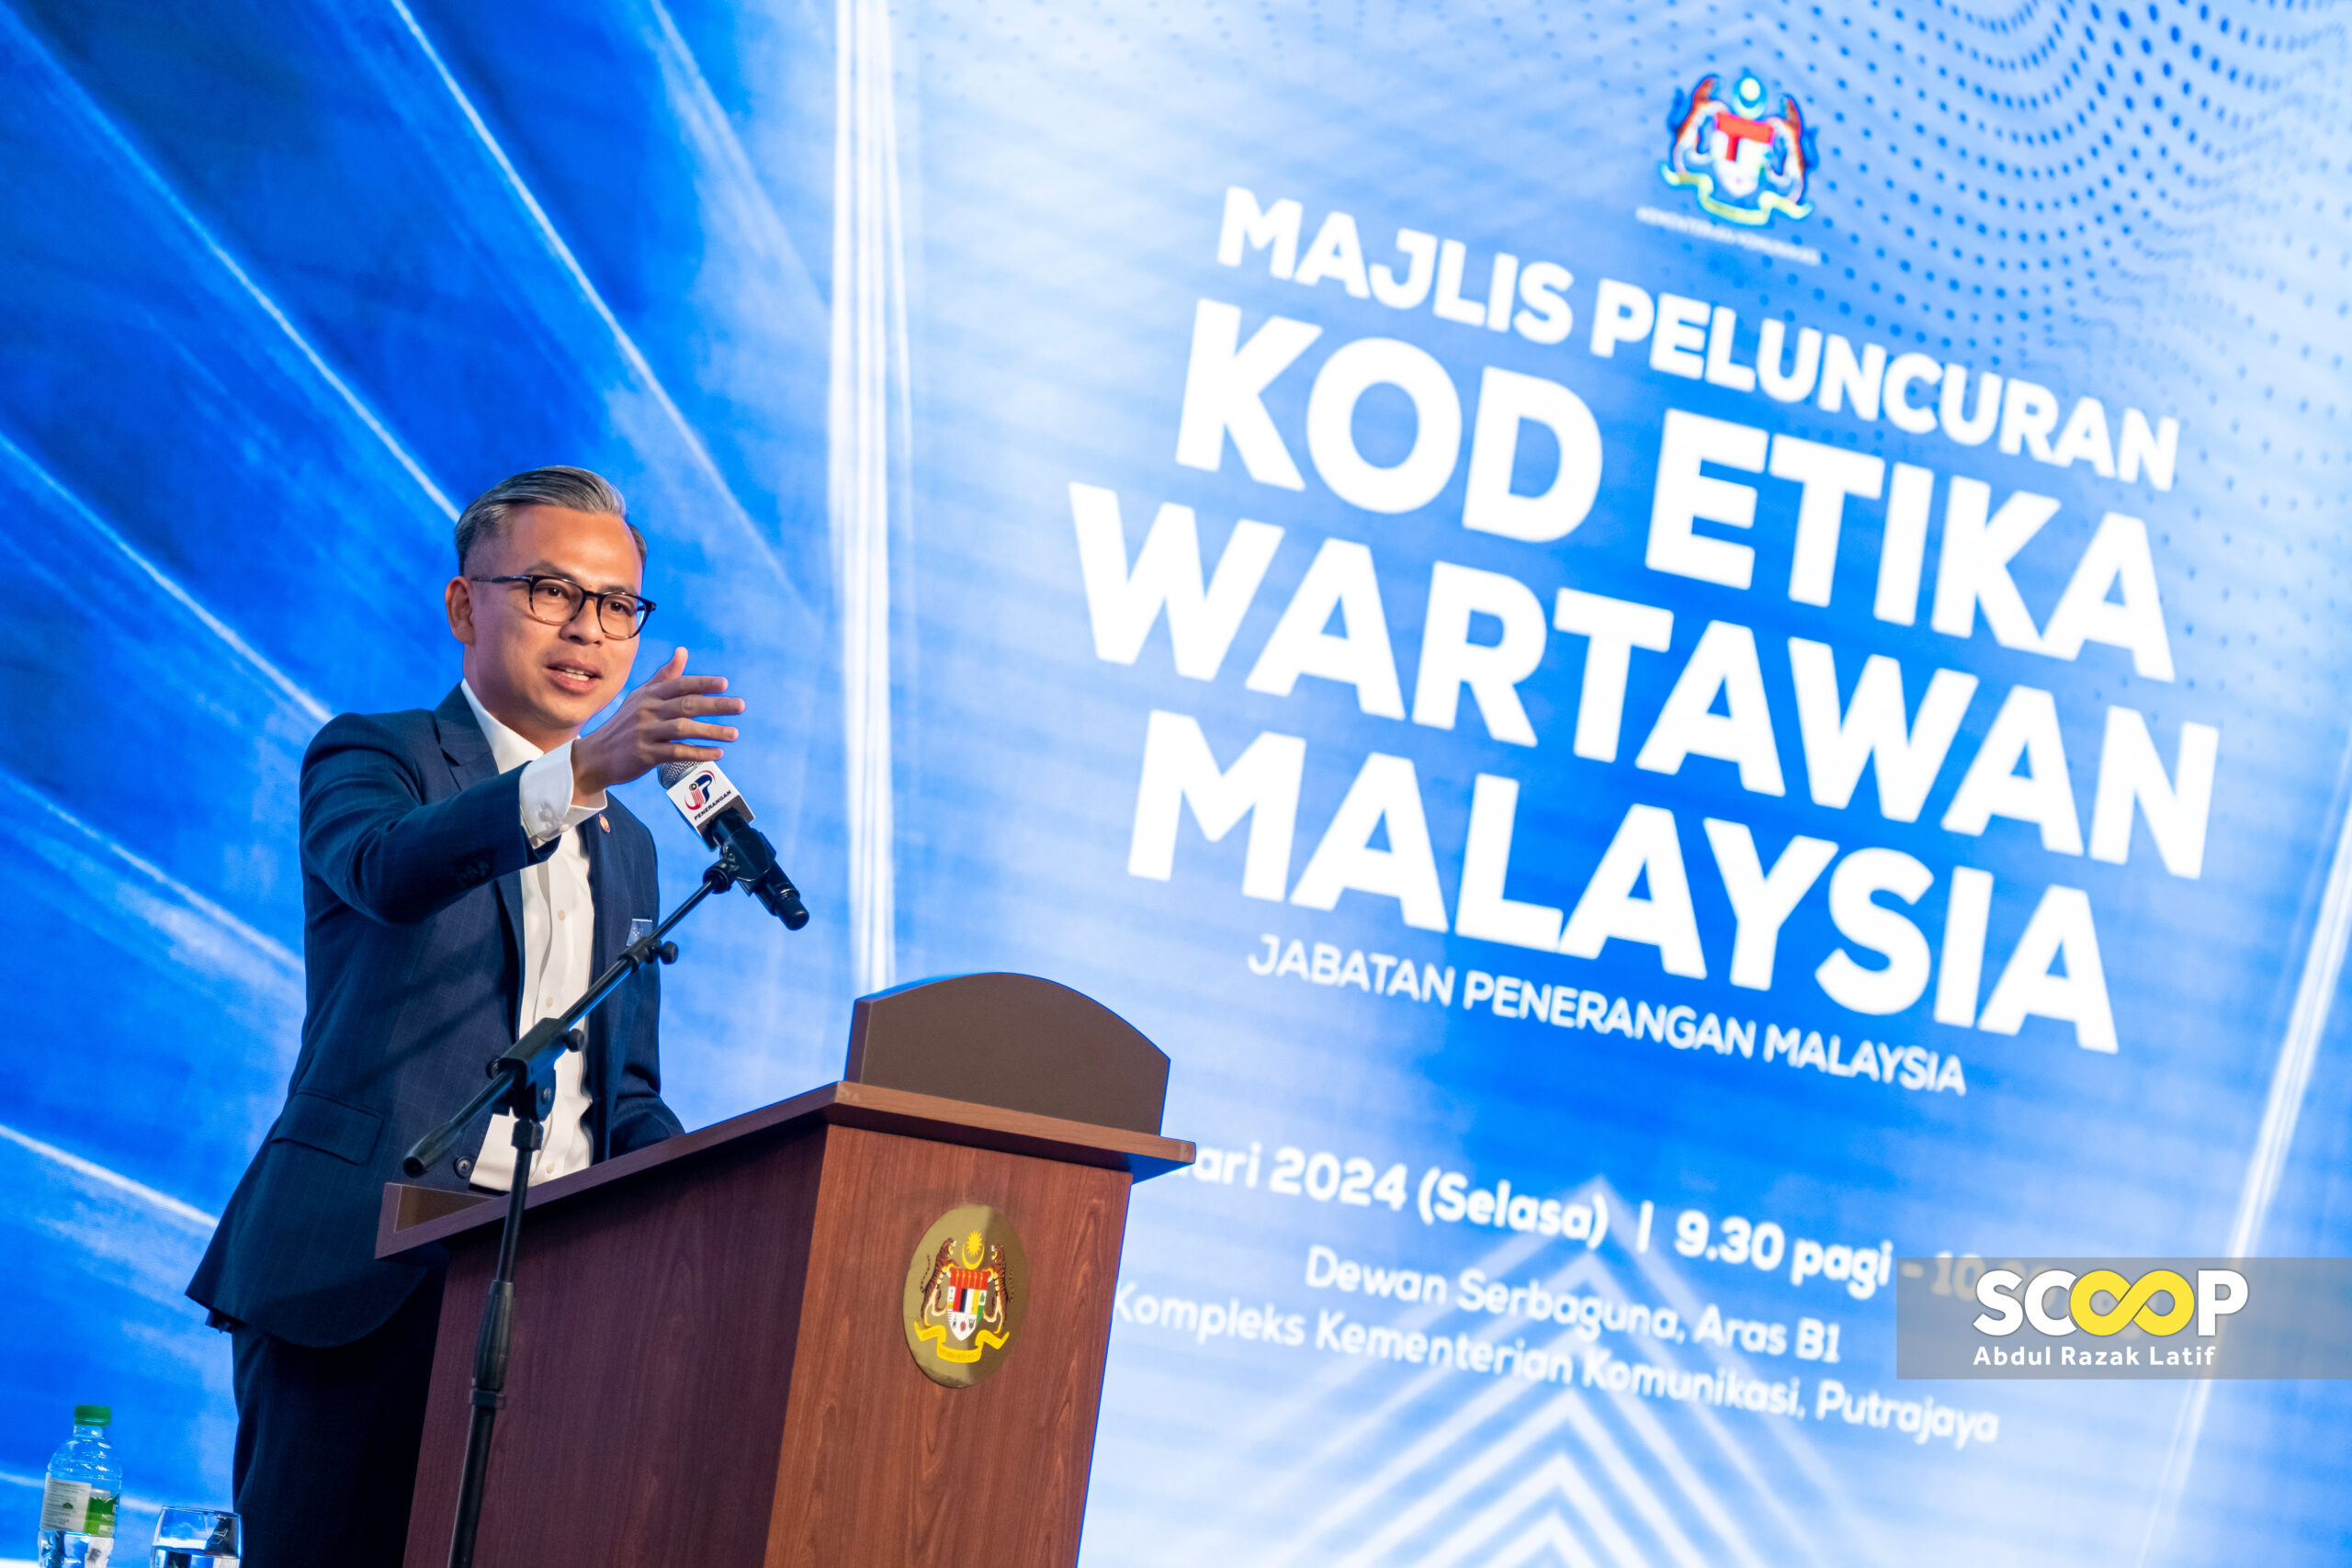 New code of ethics for journalists safeguards media freedom, says Fahmi